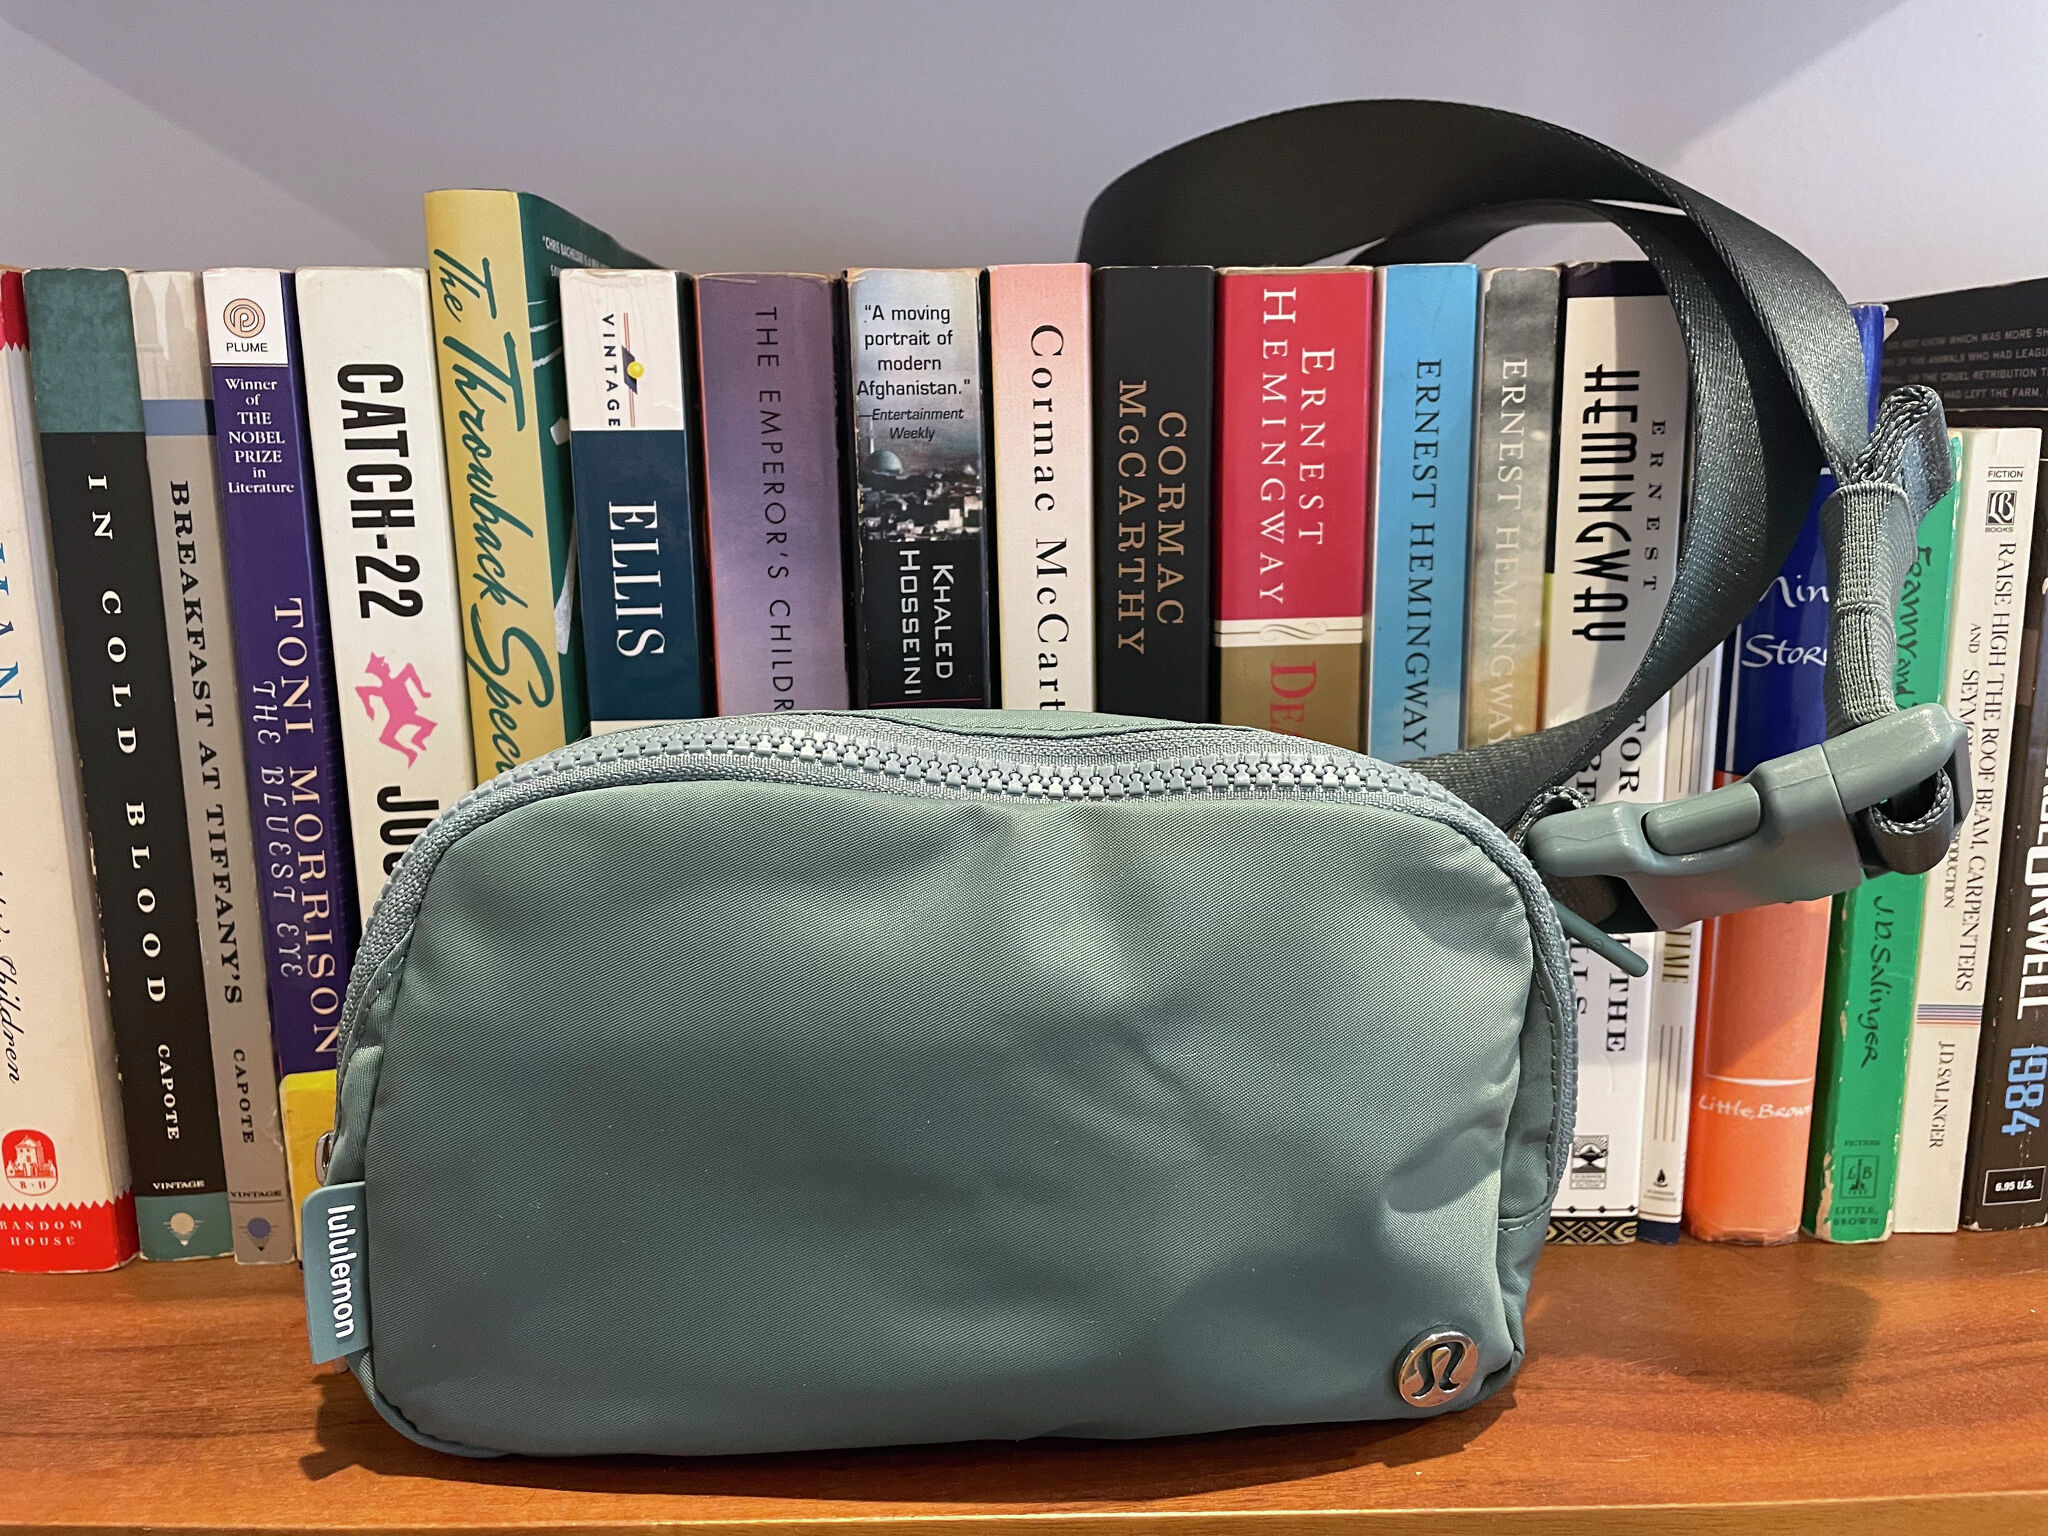 How To Convert A Crossbody Bag To Fanny Pack